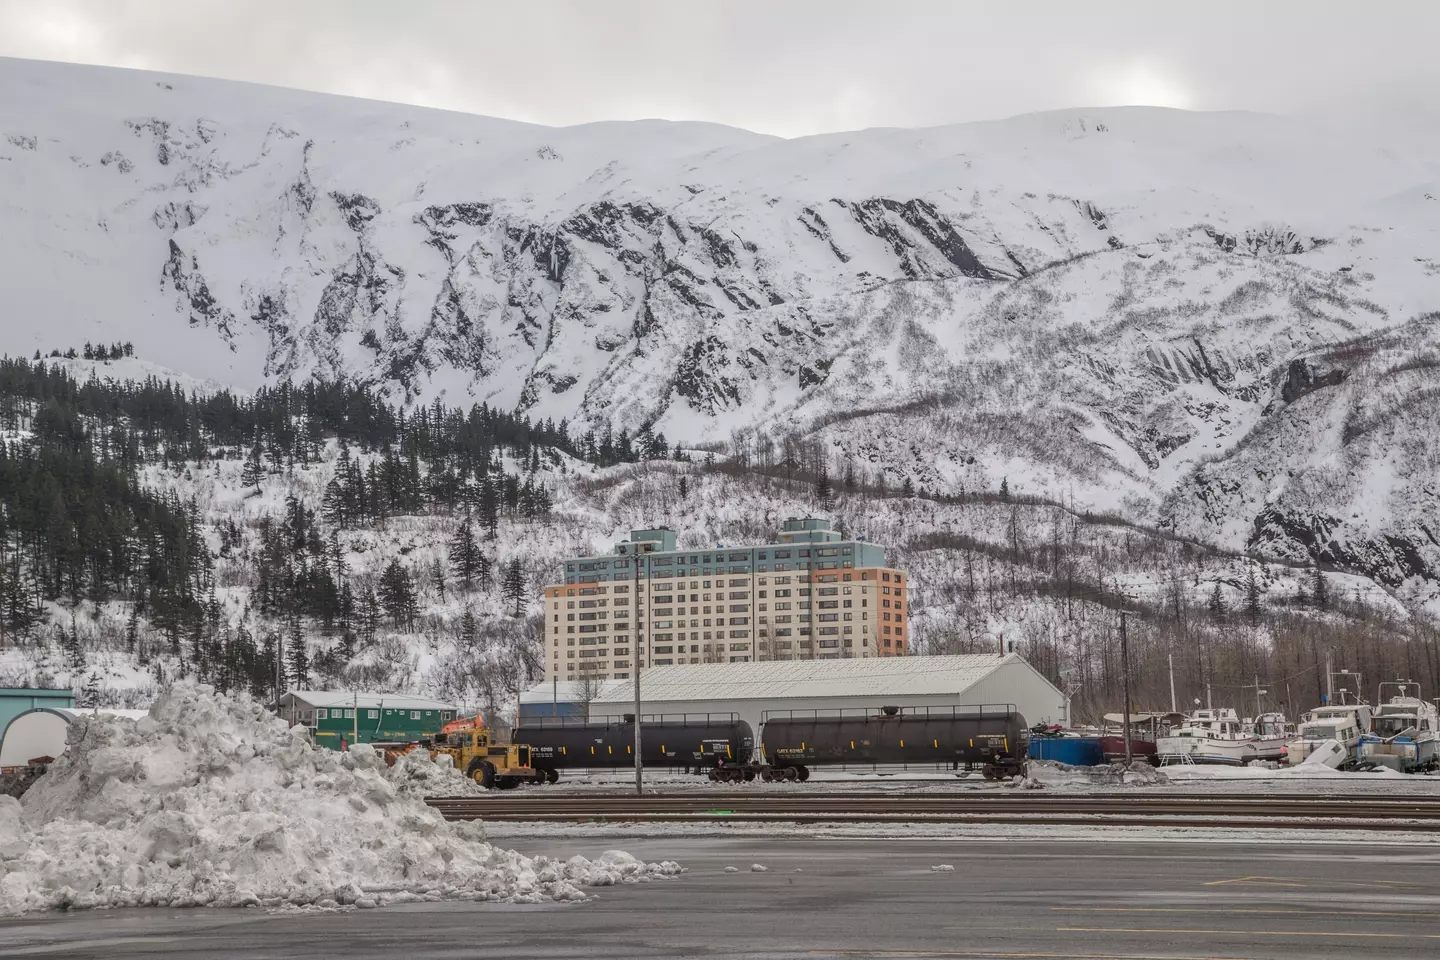 Whittier, Alaska is the home to just 200 residents - 180 of whom live in the same building.